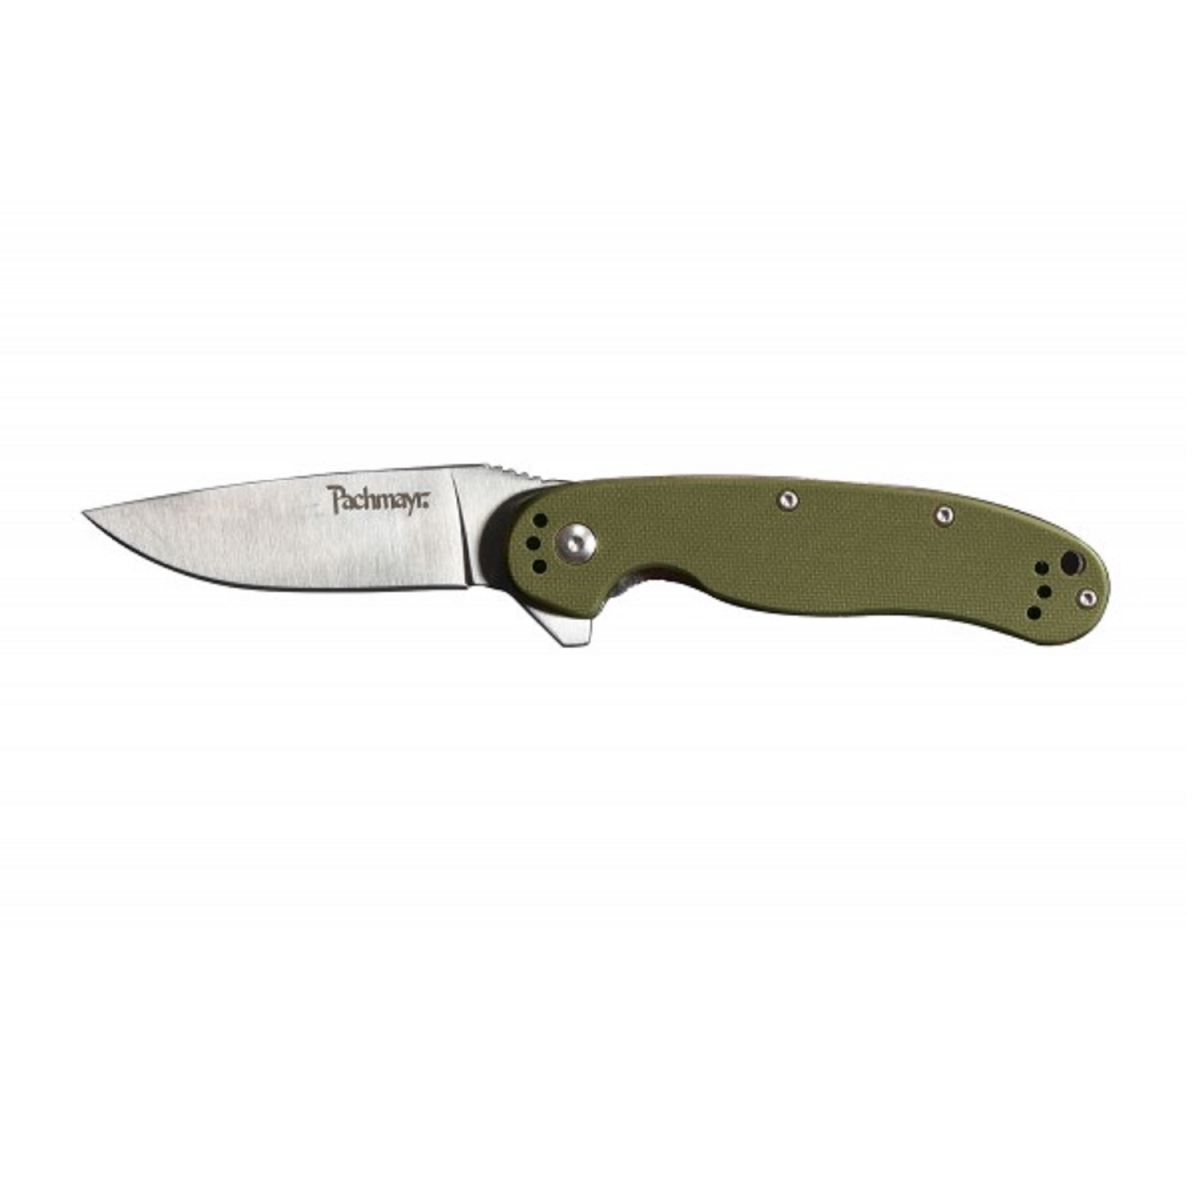 4019400 2.85 In. Snare Folder Knife Blade With G-10 Handle, Od Green